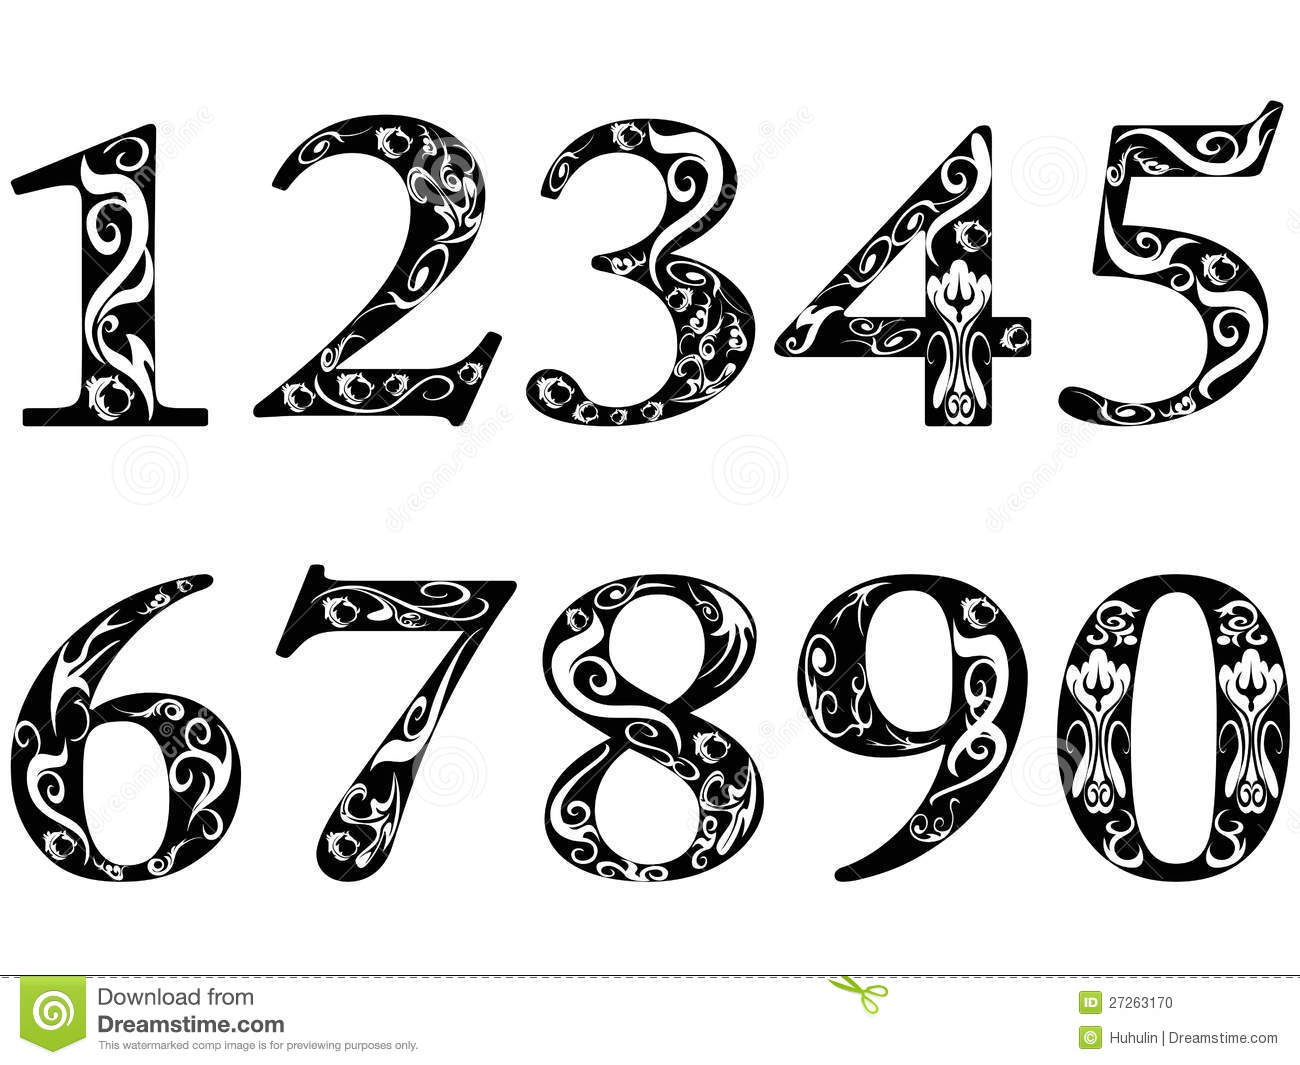 6. Tribal Number Fonts for Tattoos - wide 5